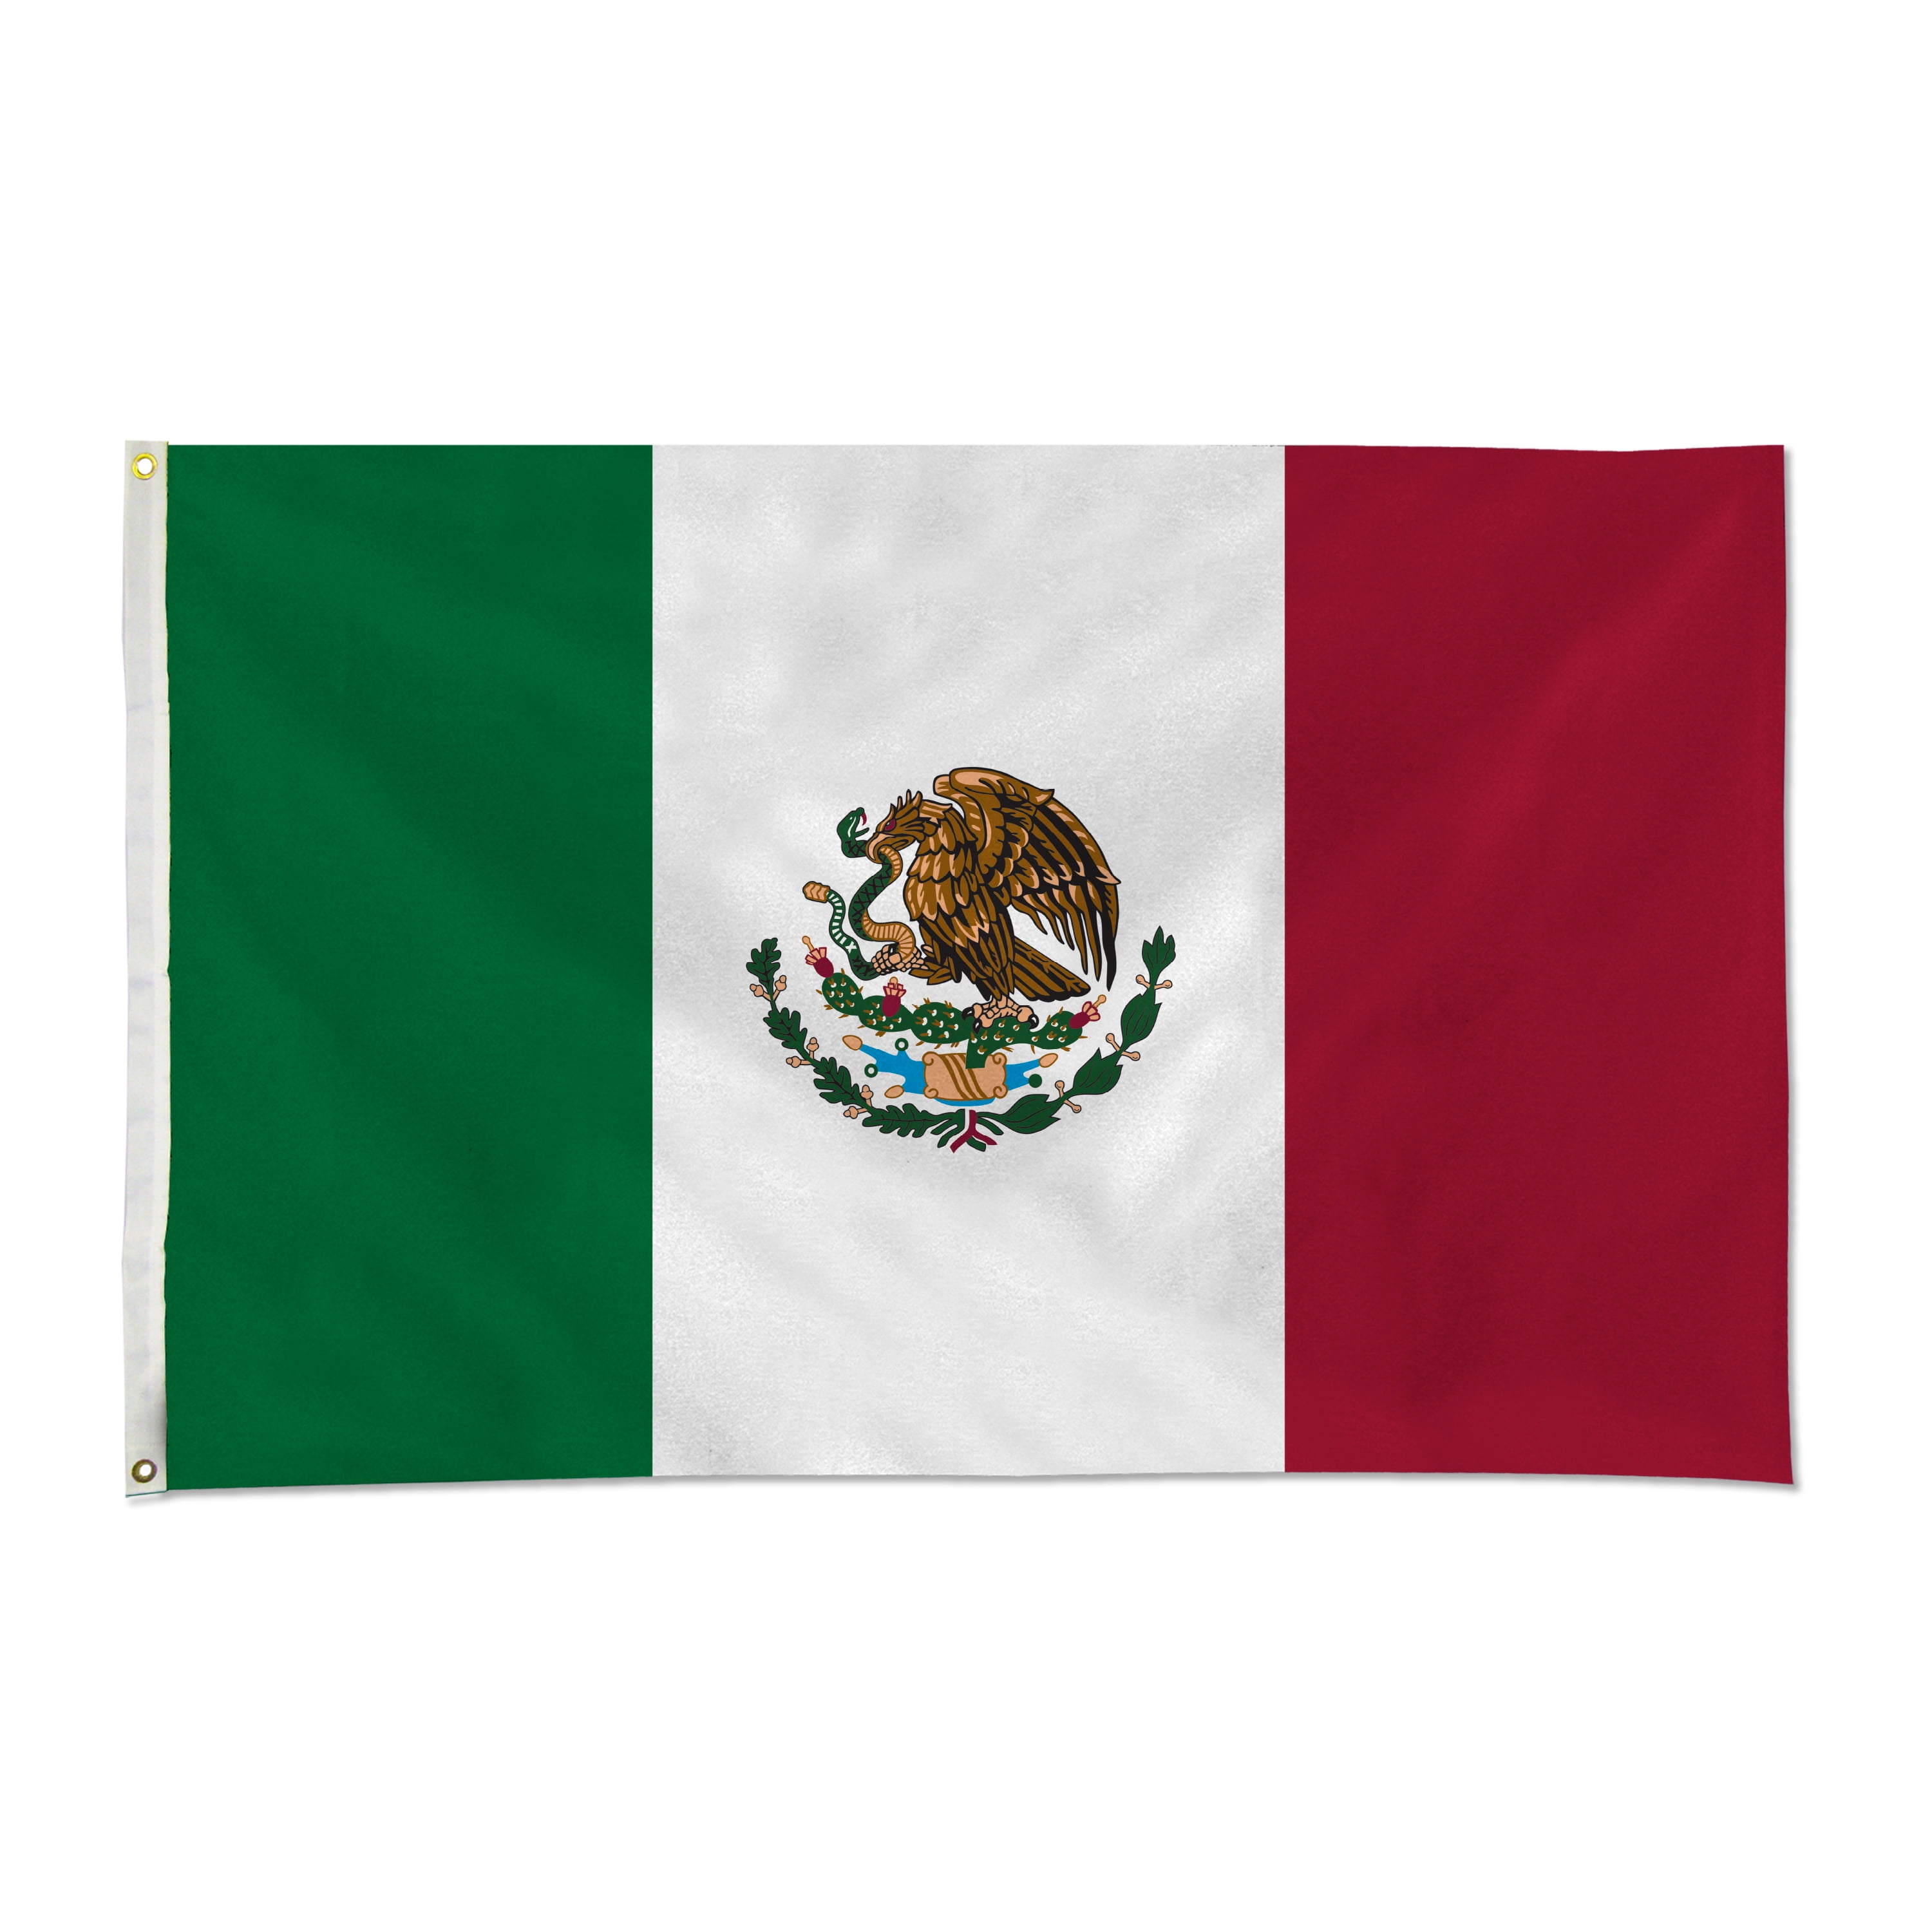 MEXICO 3X5 FT NATIONAL FLAG MADE IN US PREMIUM QUALITY TEXAS FAST SHIPPING 